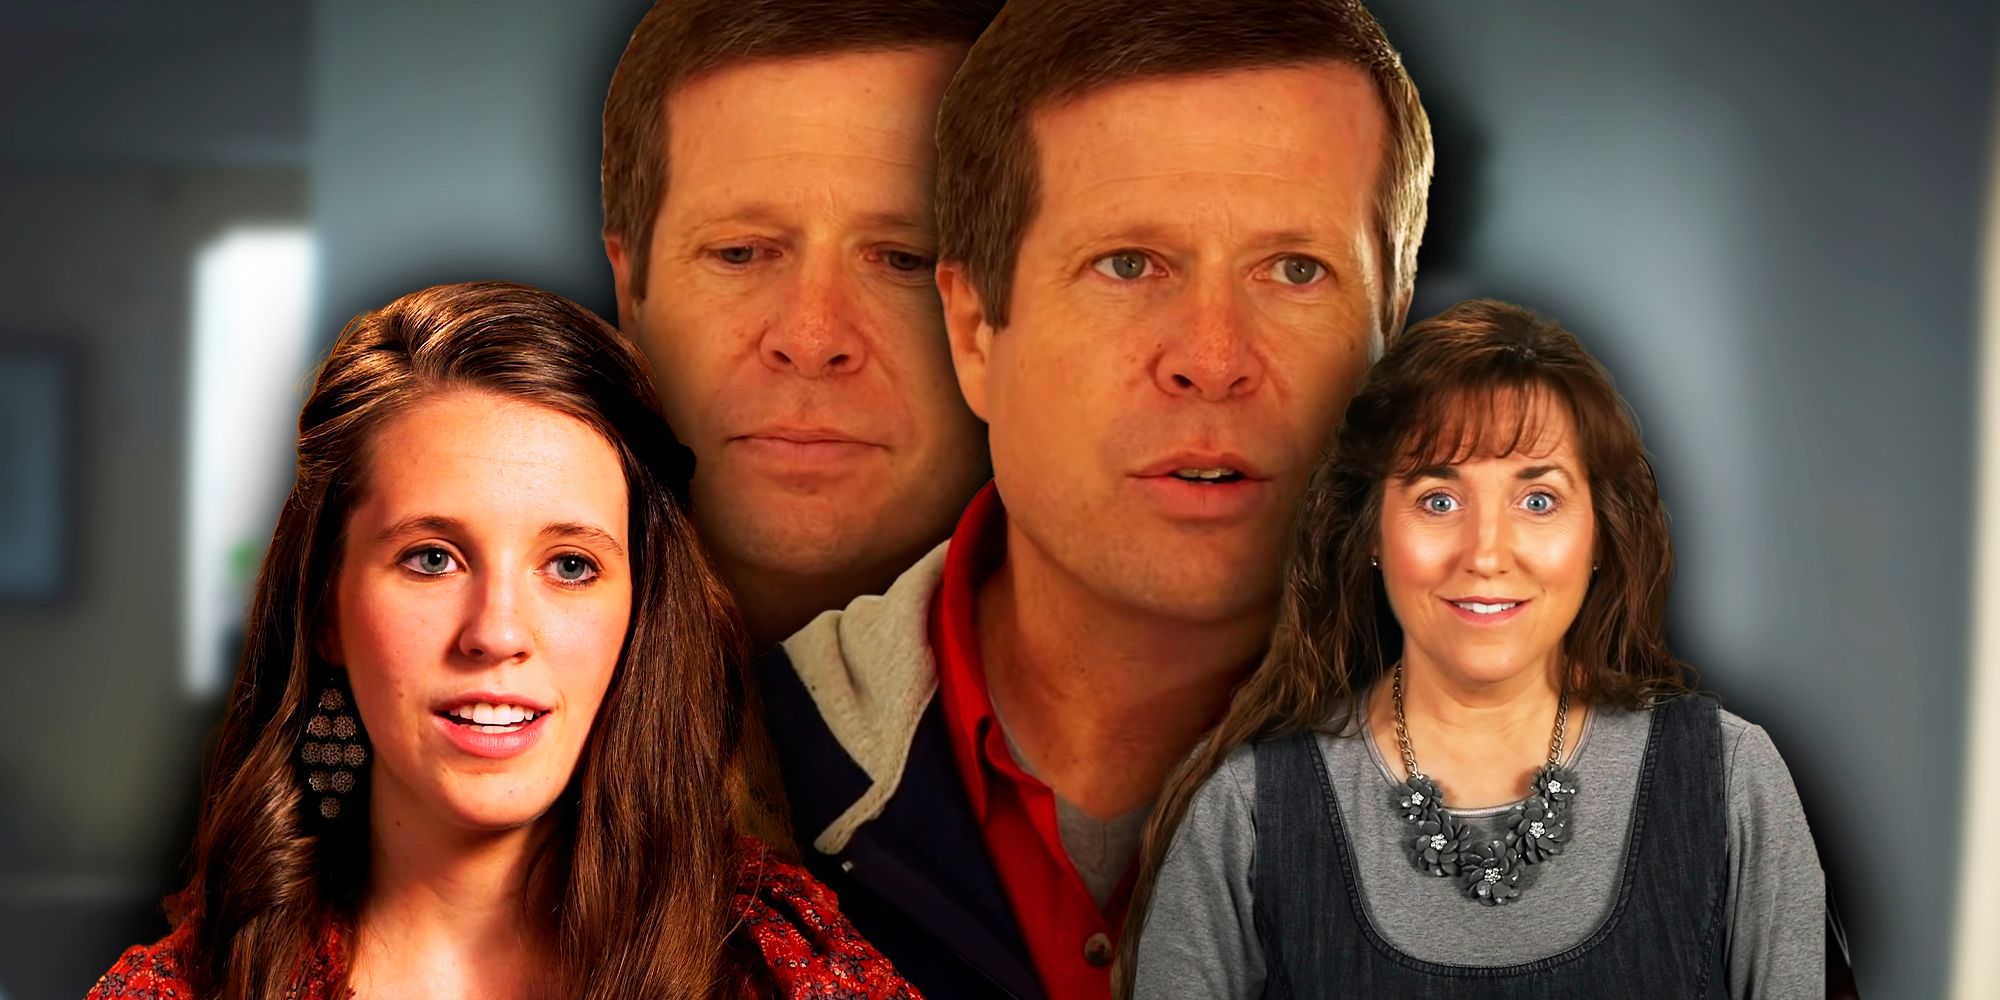 duggars montage jim bob michelle and daughter